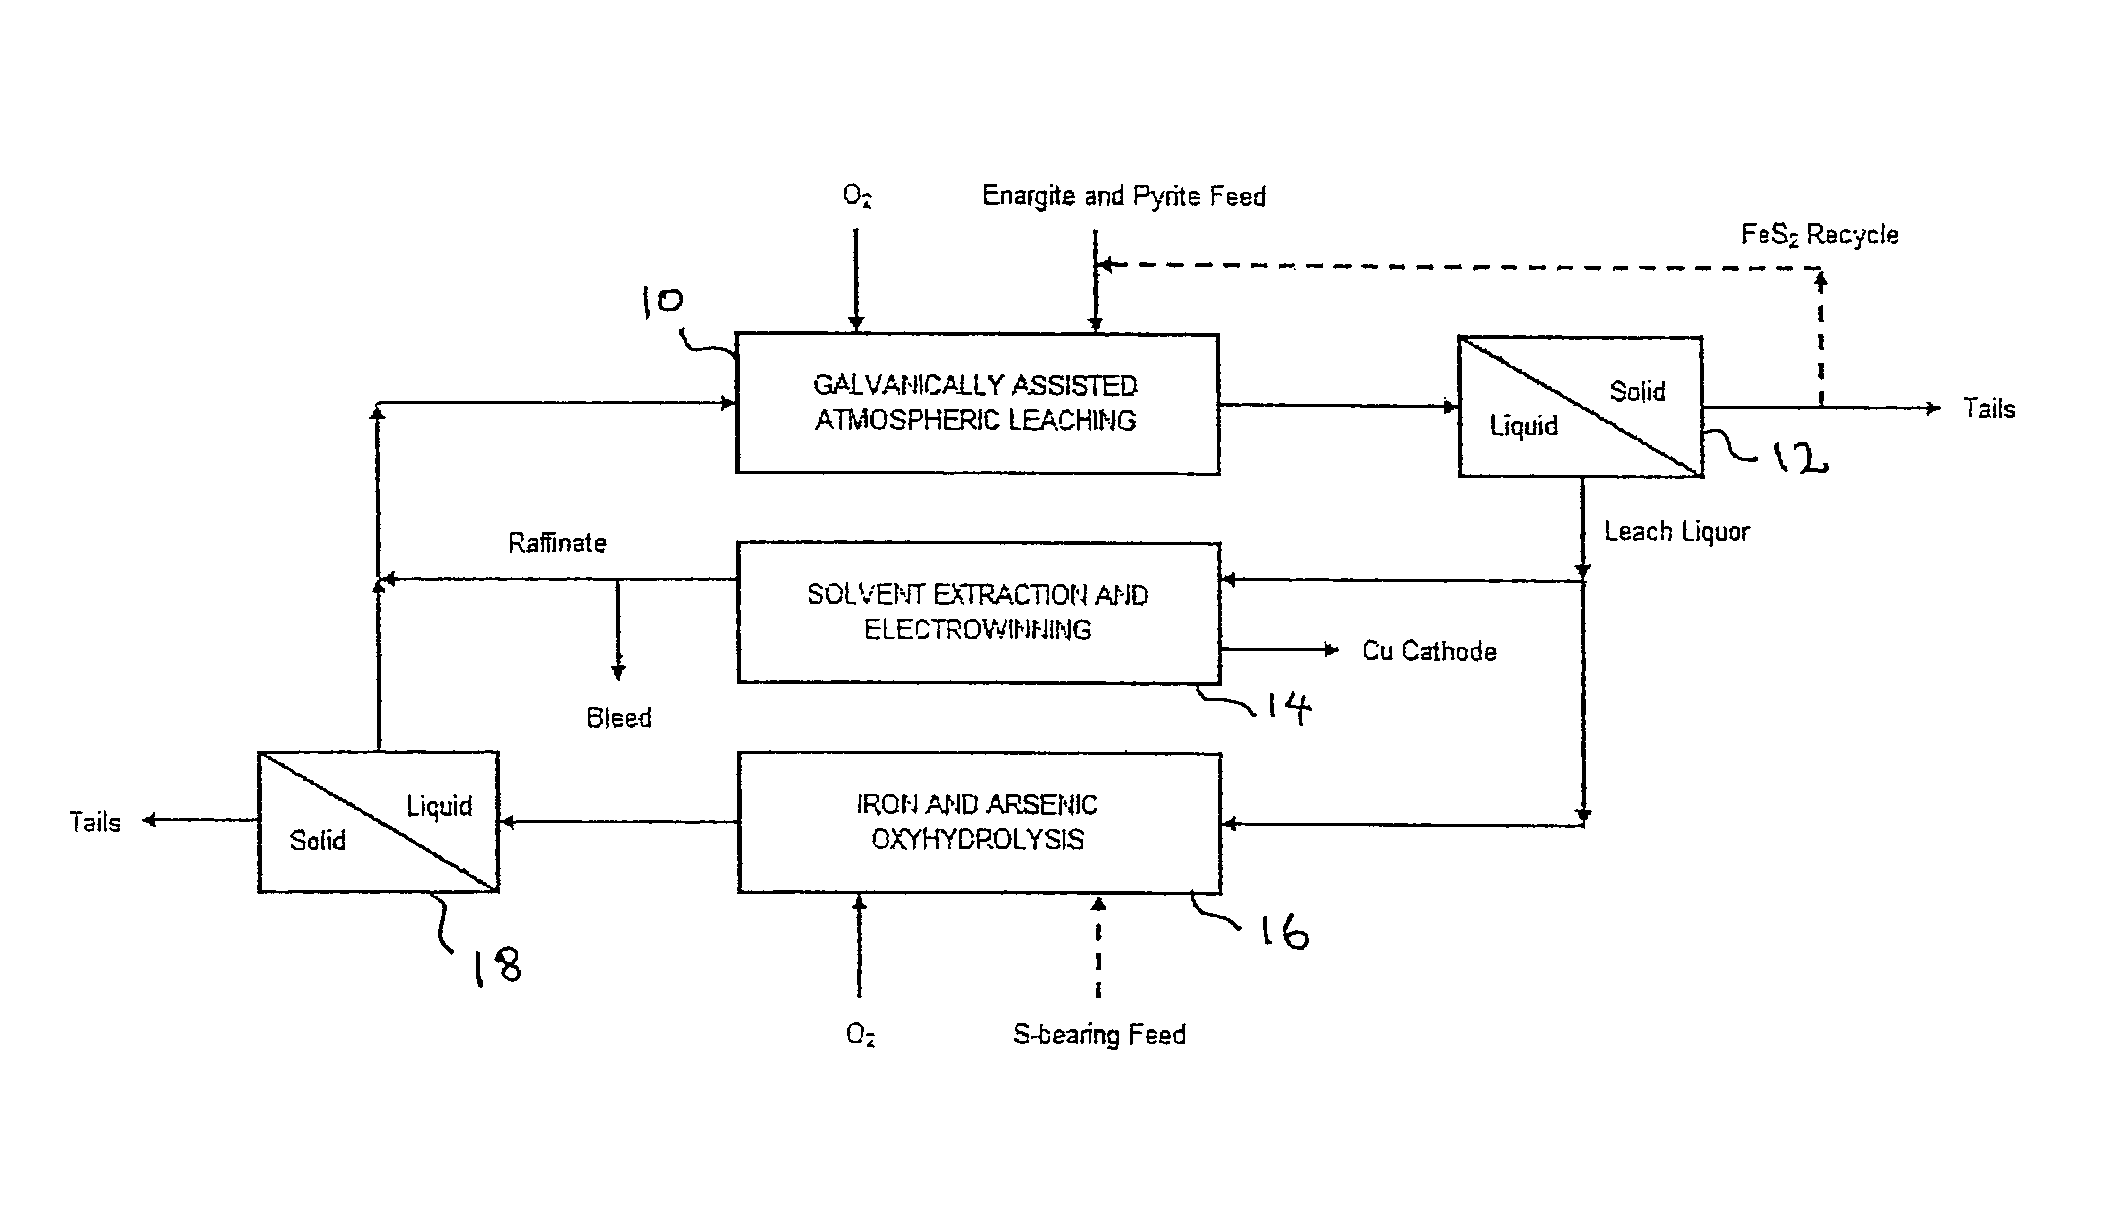 Leaching process for copper concentrates containing arsenic and antimony compounds